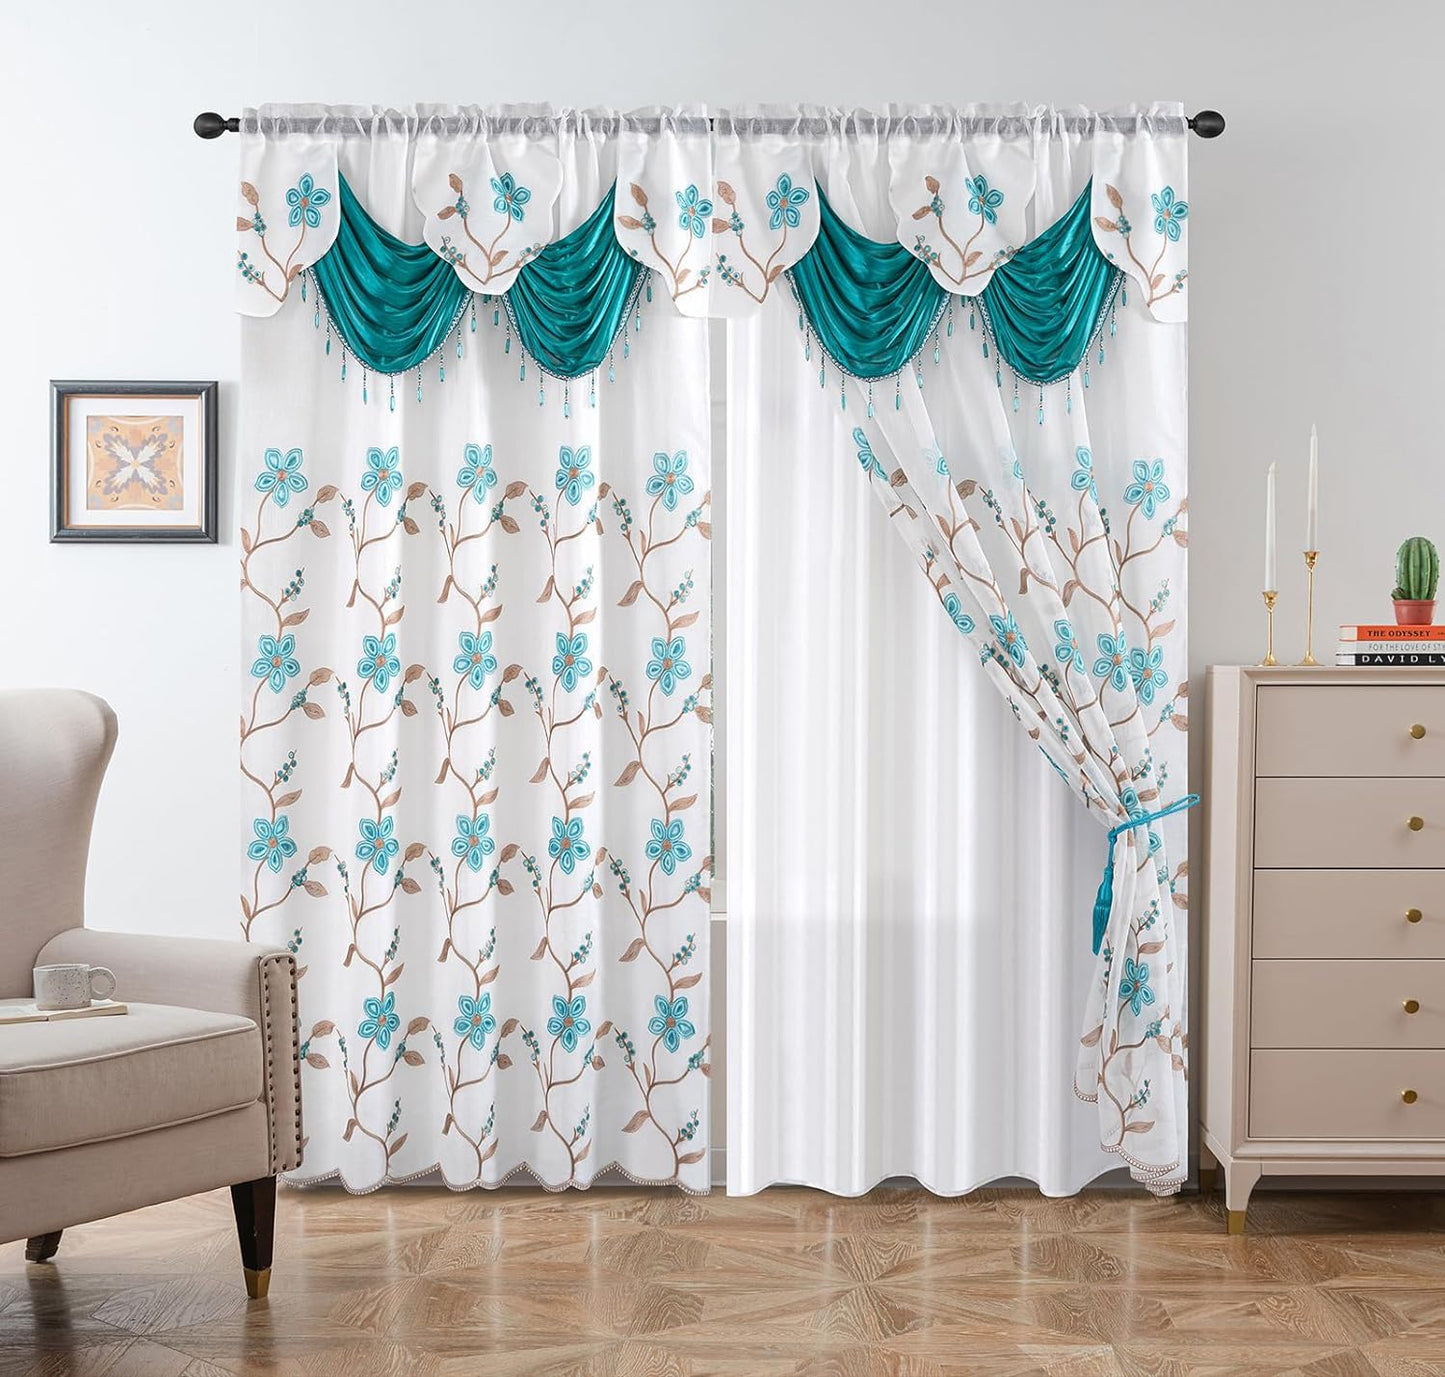 Petrichor Embroidery Sheer Curtain 2 Panels Set - Luxury Window Curtain Attached Valance with Satin Backing and 2 Tie Backs for Living Room,Dining Room, 54X95 Inches, Navy  Petrichor Turquoise 95"L X 54"W 